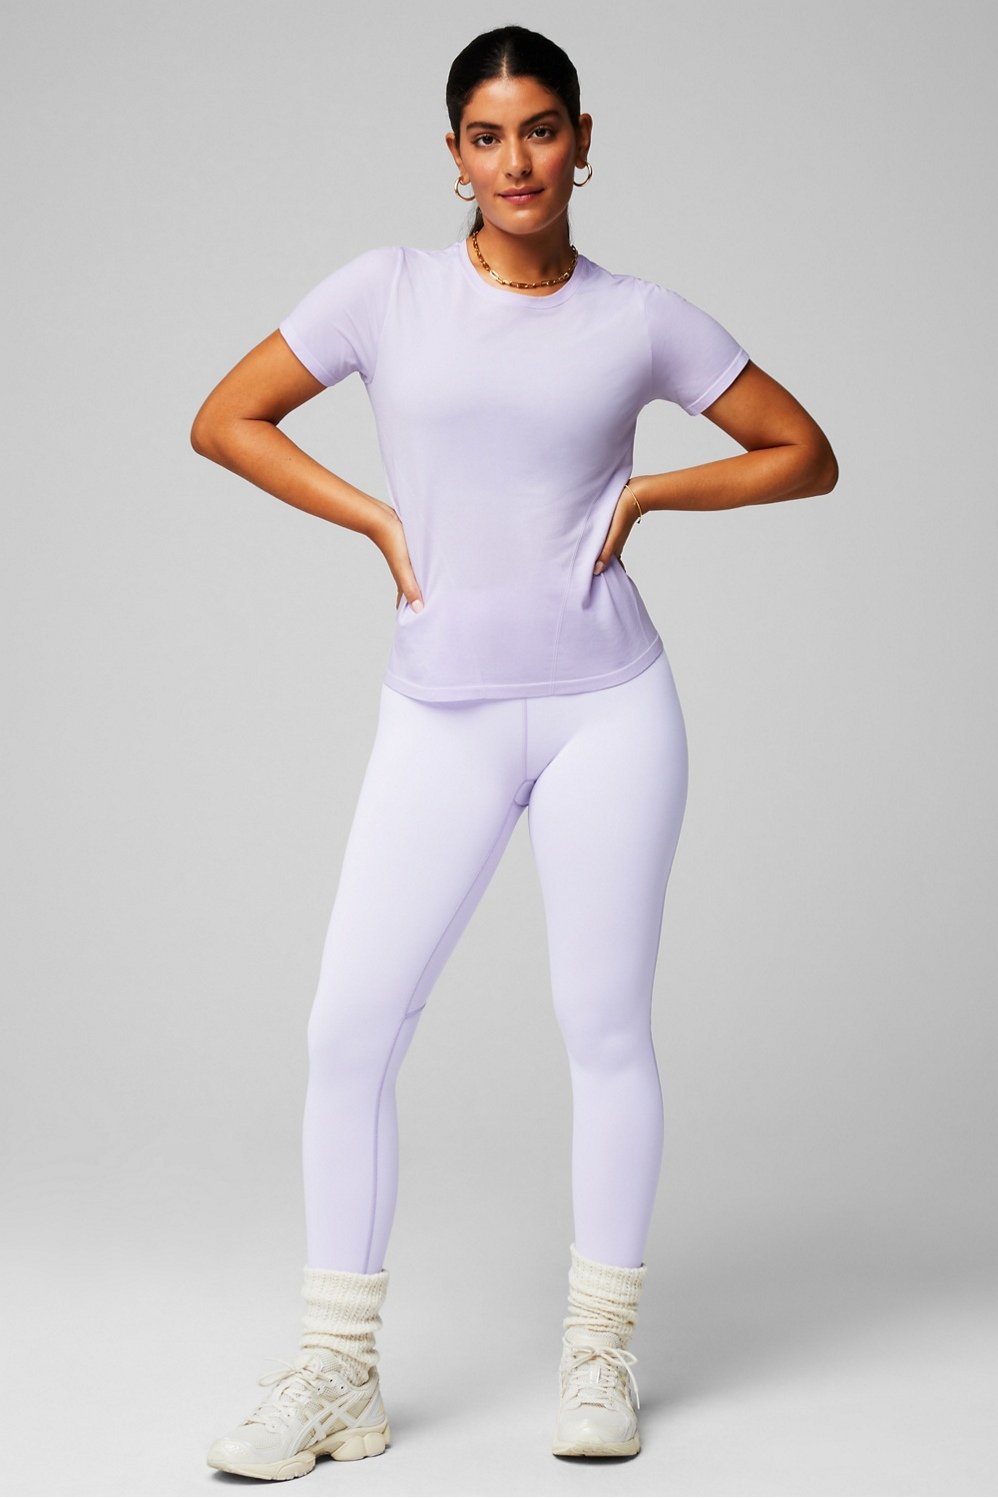 Feather Tech Short-Sleeve Top - Fabletics